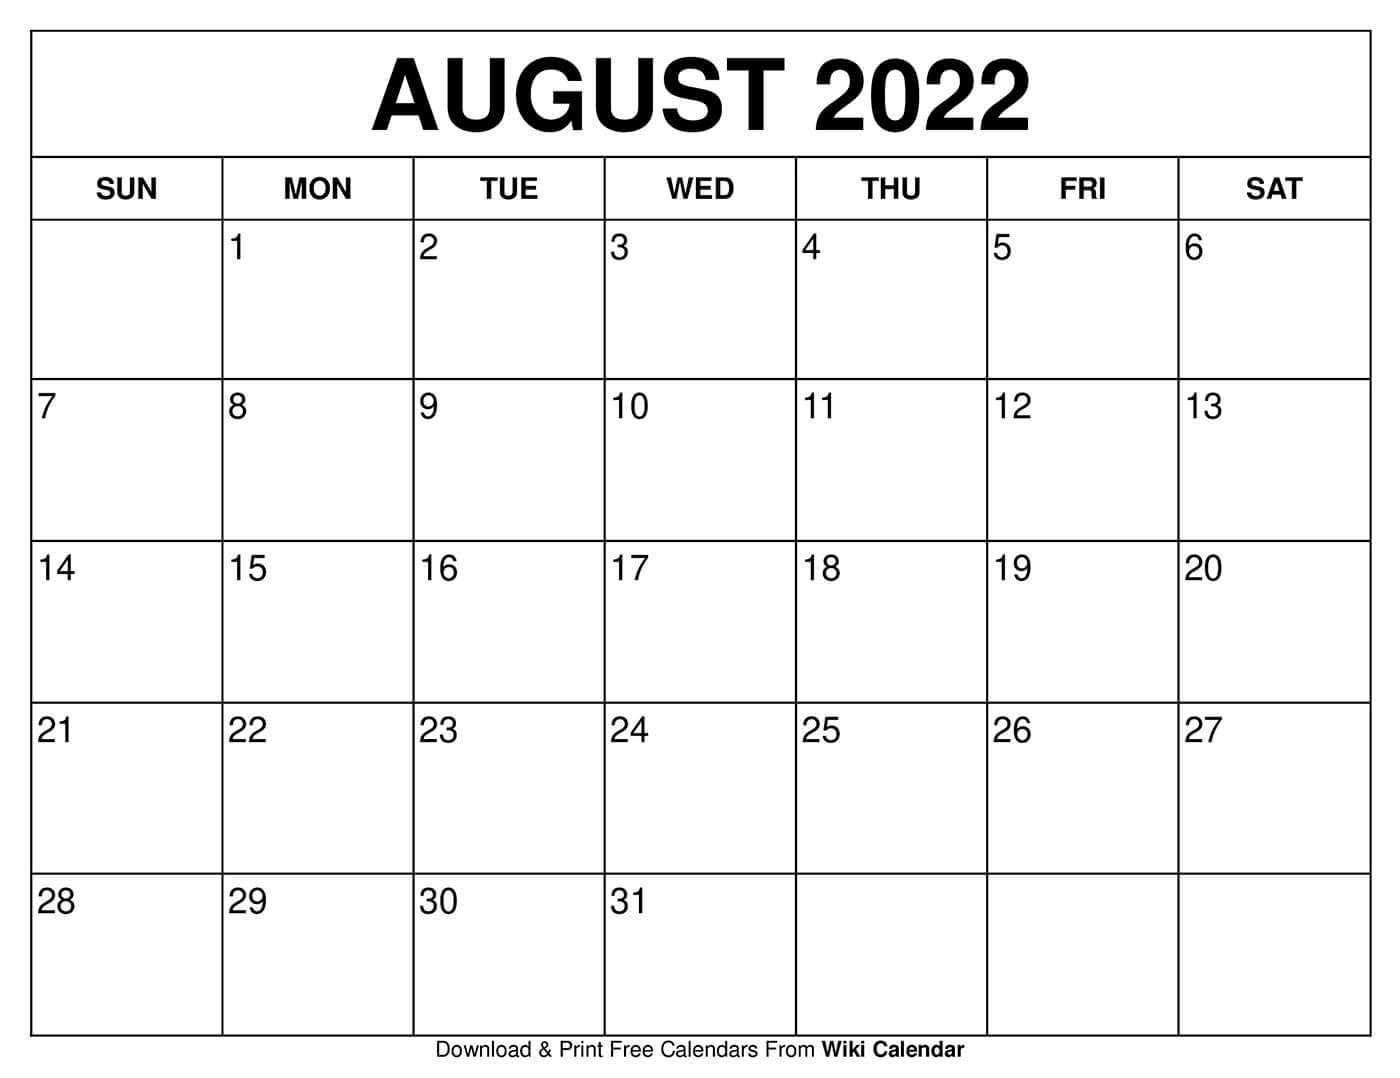 august-2022-printable-calendar-with-holidays-6-templates-riset